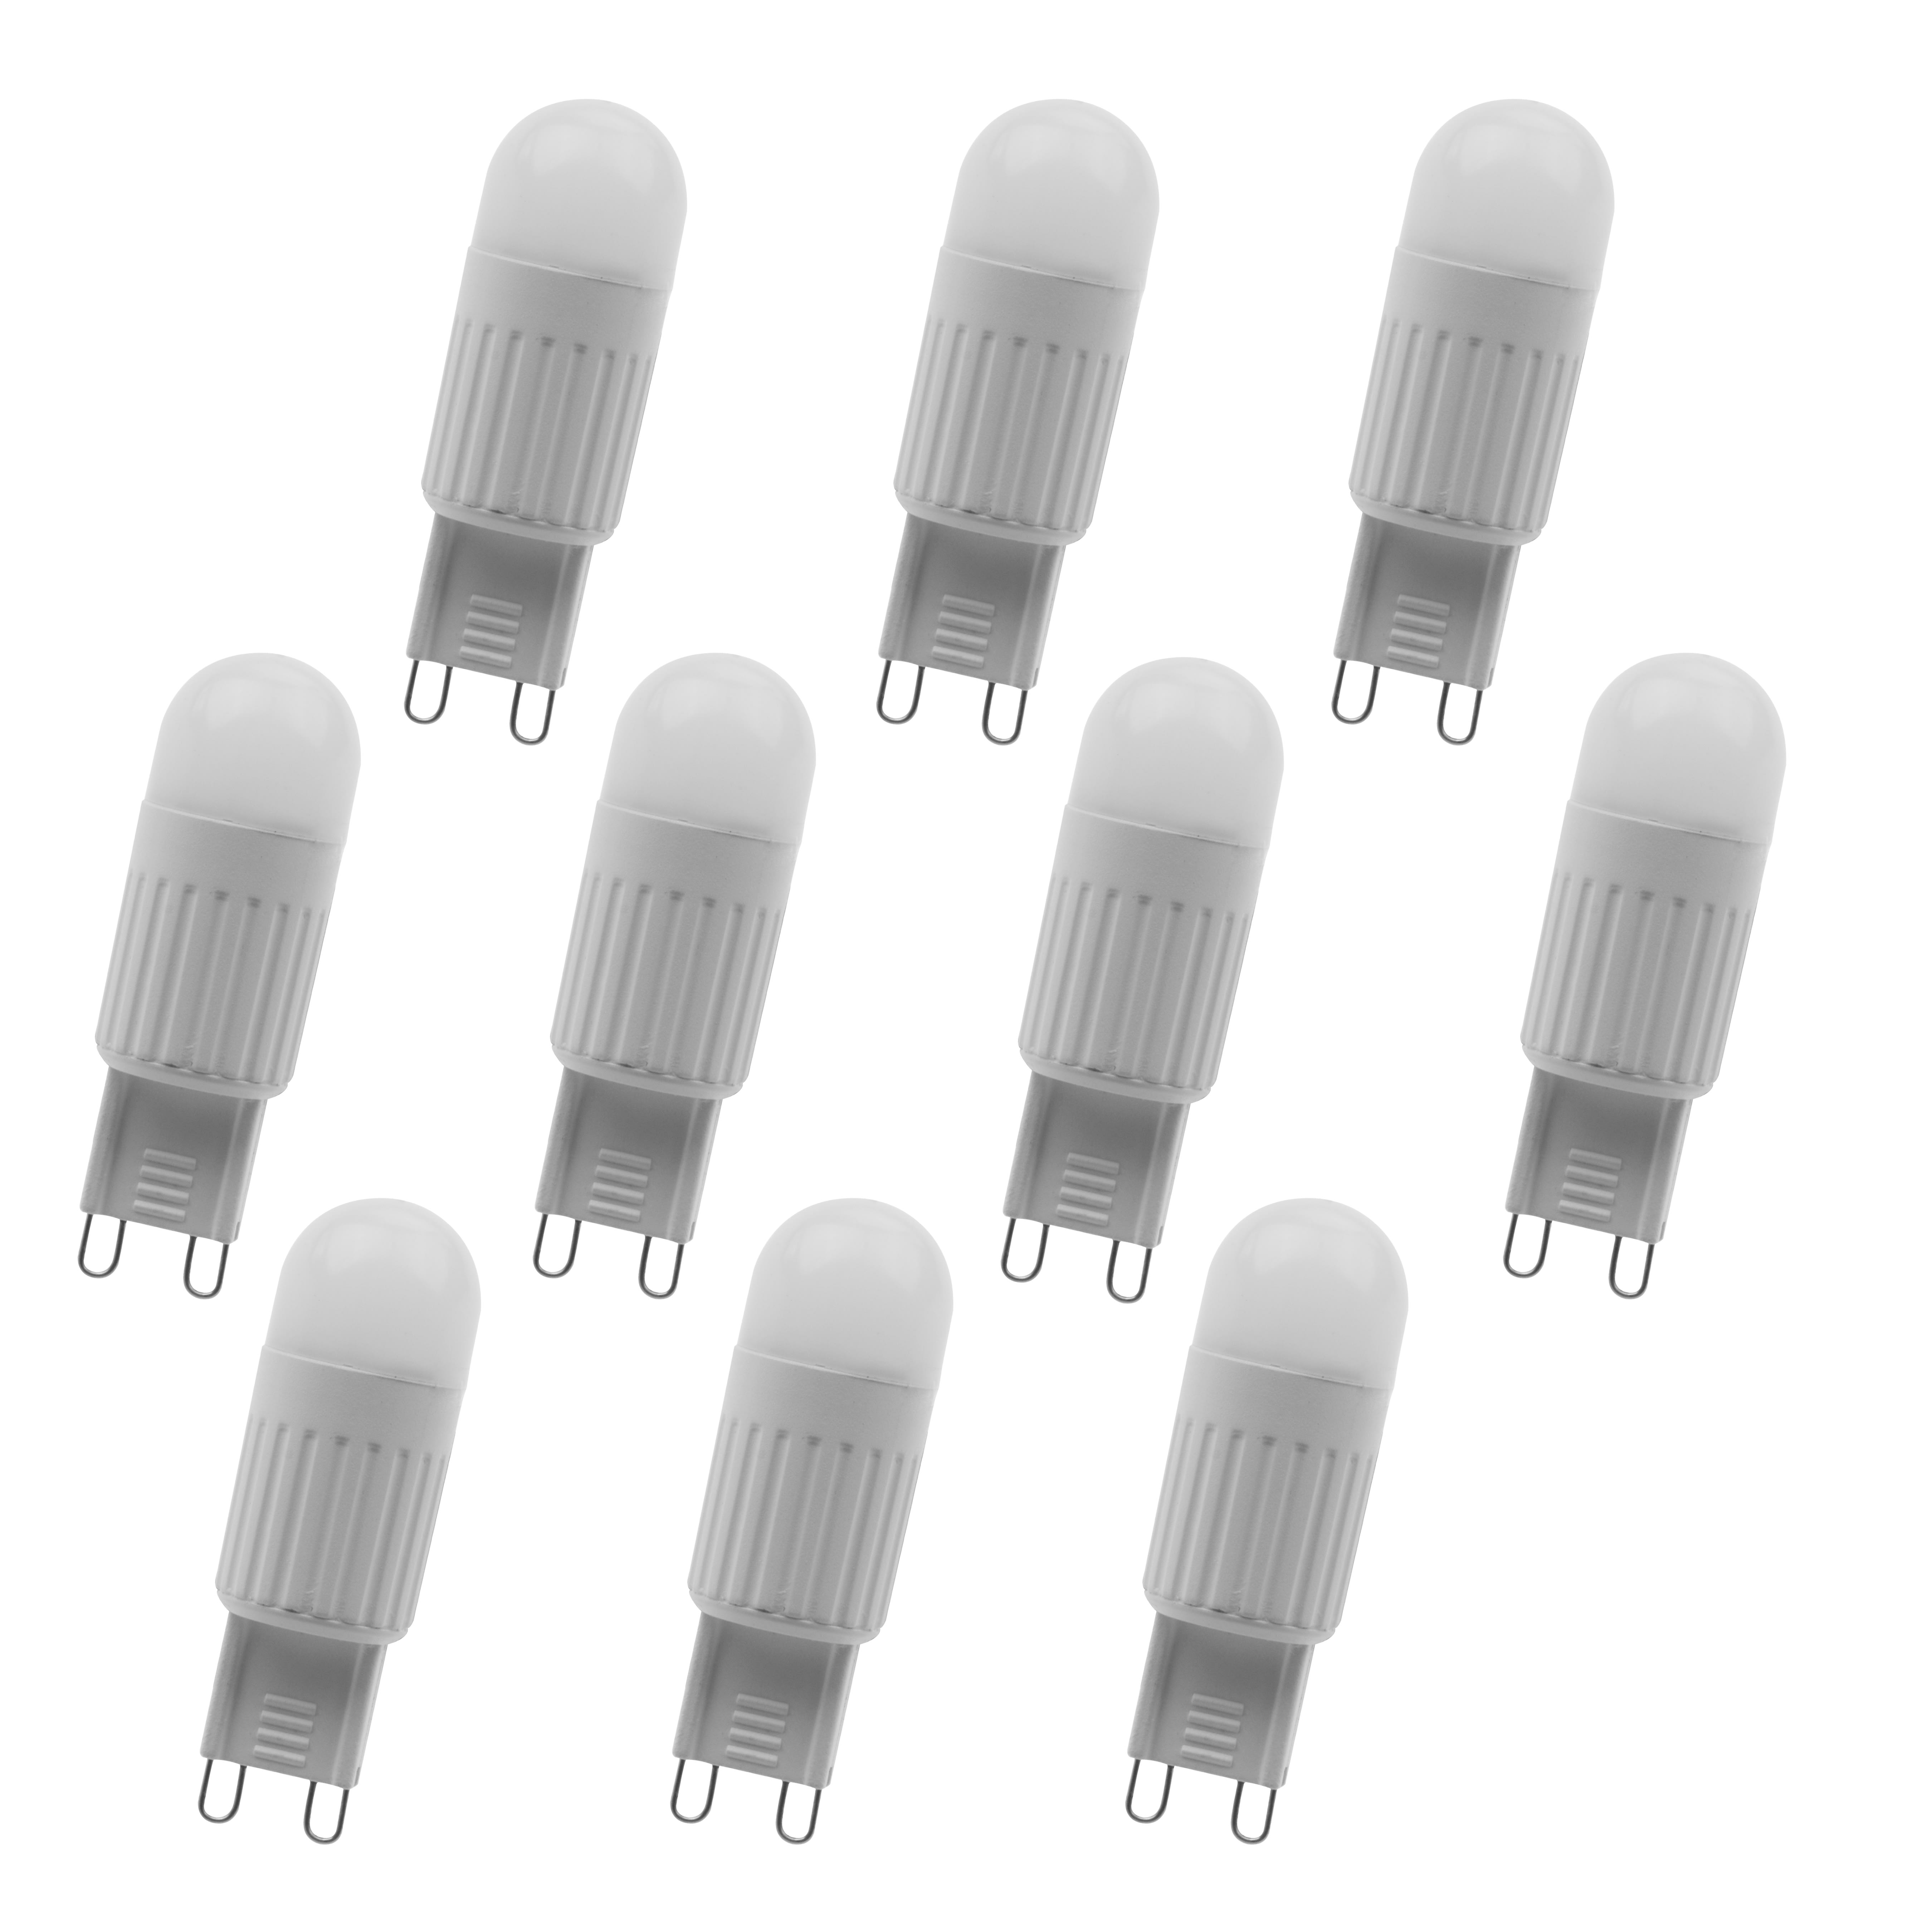 Lighting N/A 3 Watt Frosted Dimmable G9 Base LED Bulbs - Pack of 10 - LightingDirect.com